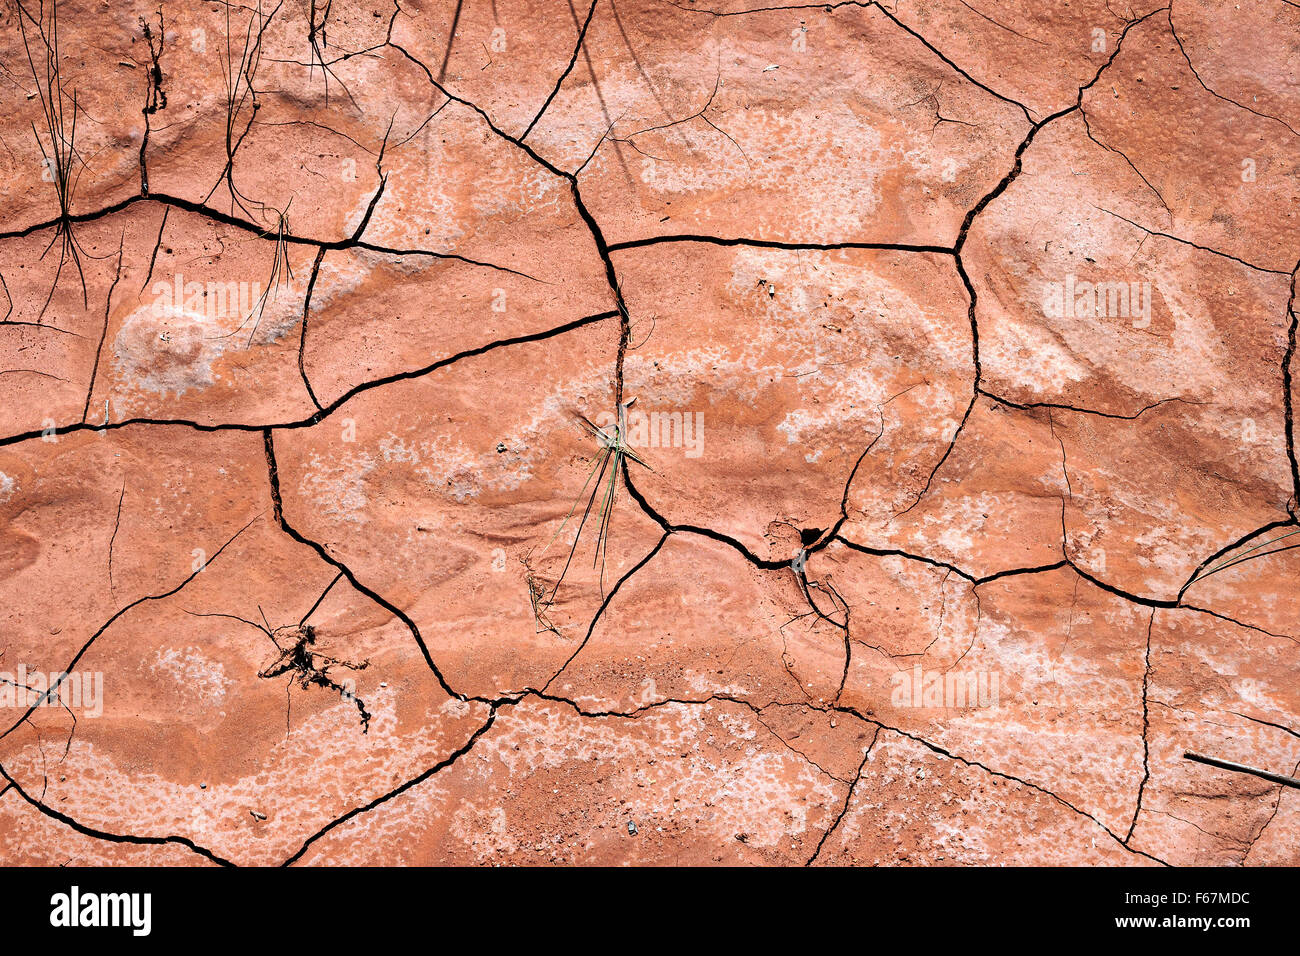 Dry earth, dry cracks in ground, Capitol Reef National Park, Utah, USA Stock Photo